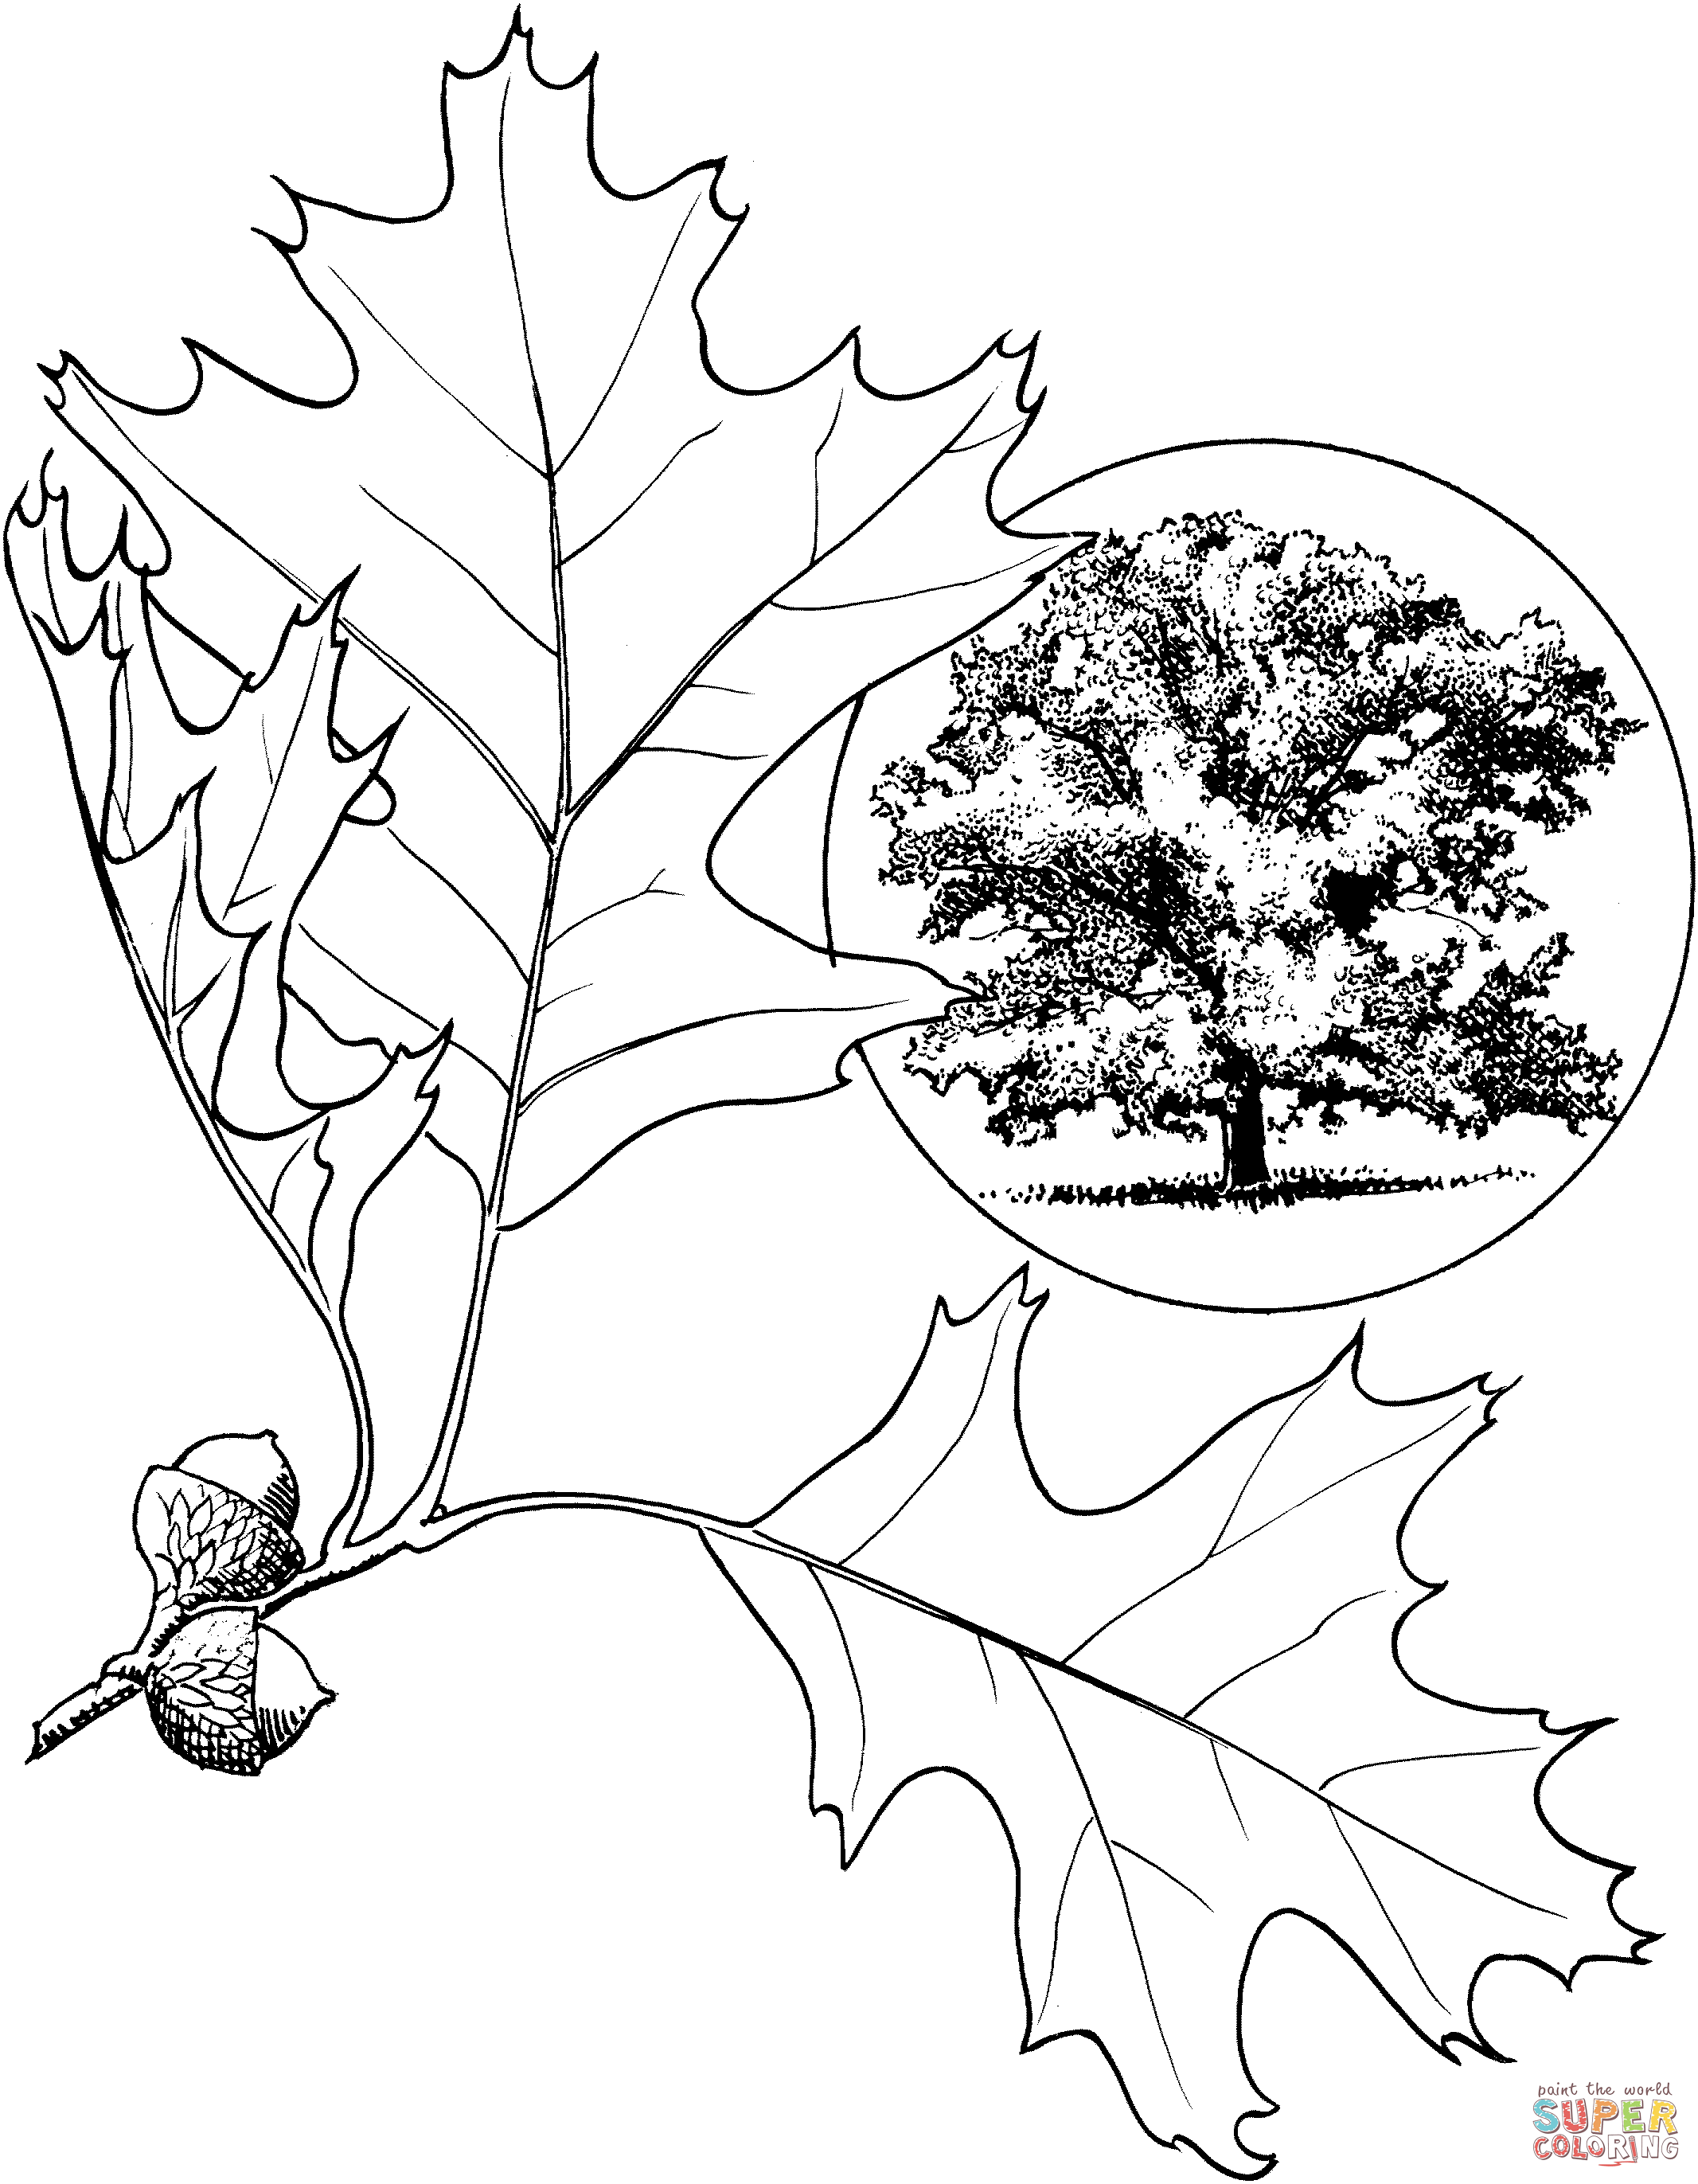 Oak tree coloring pages